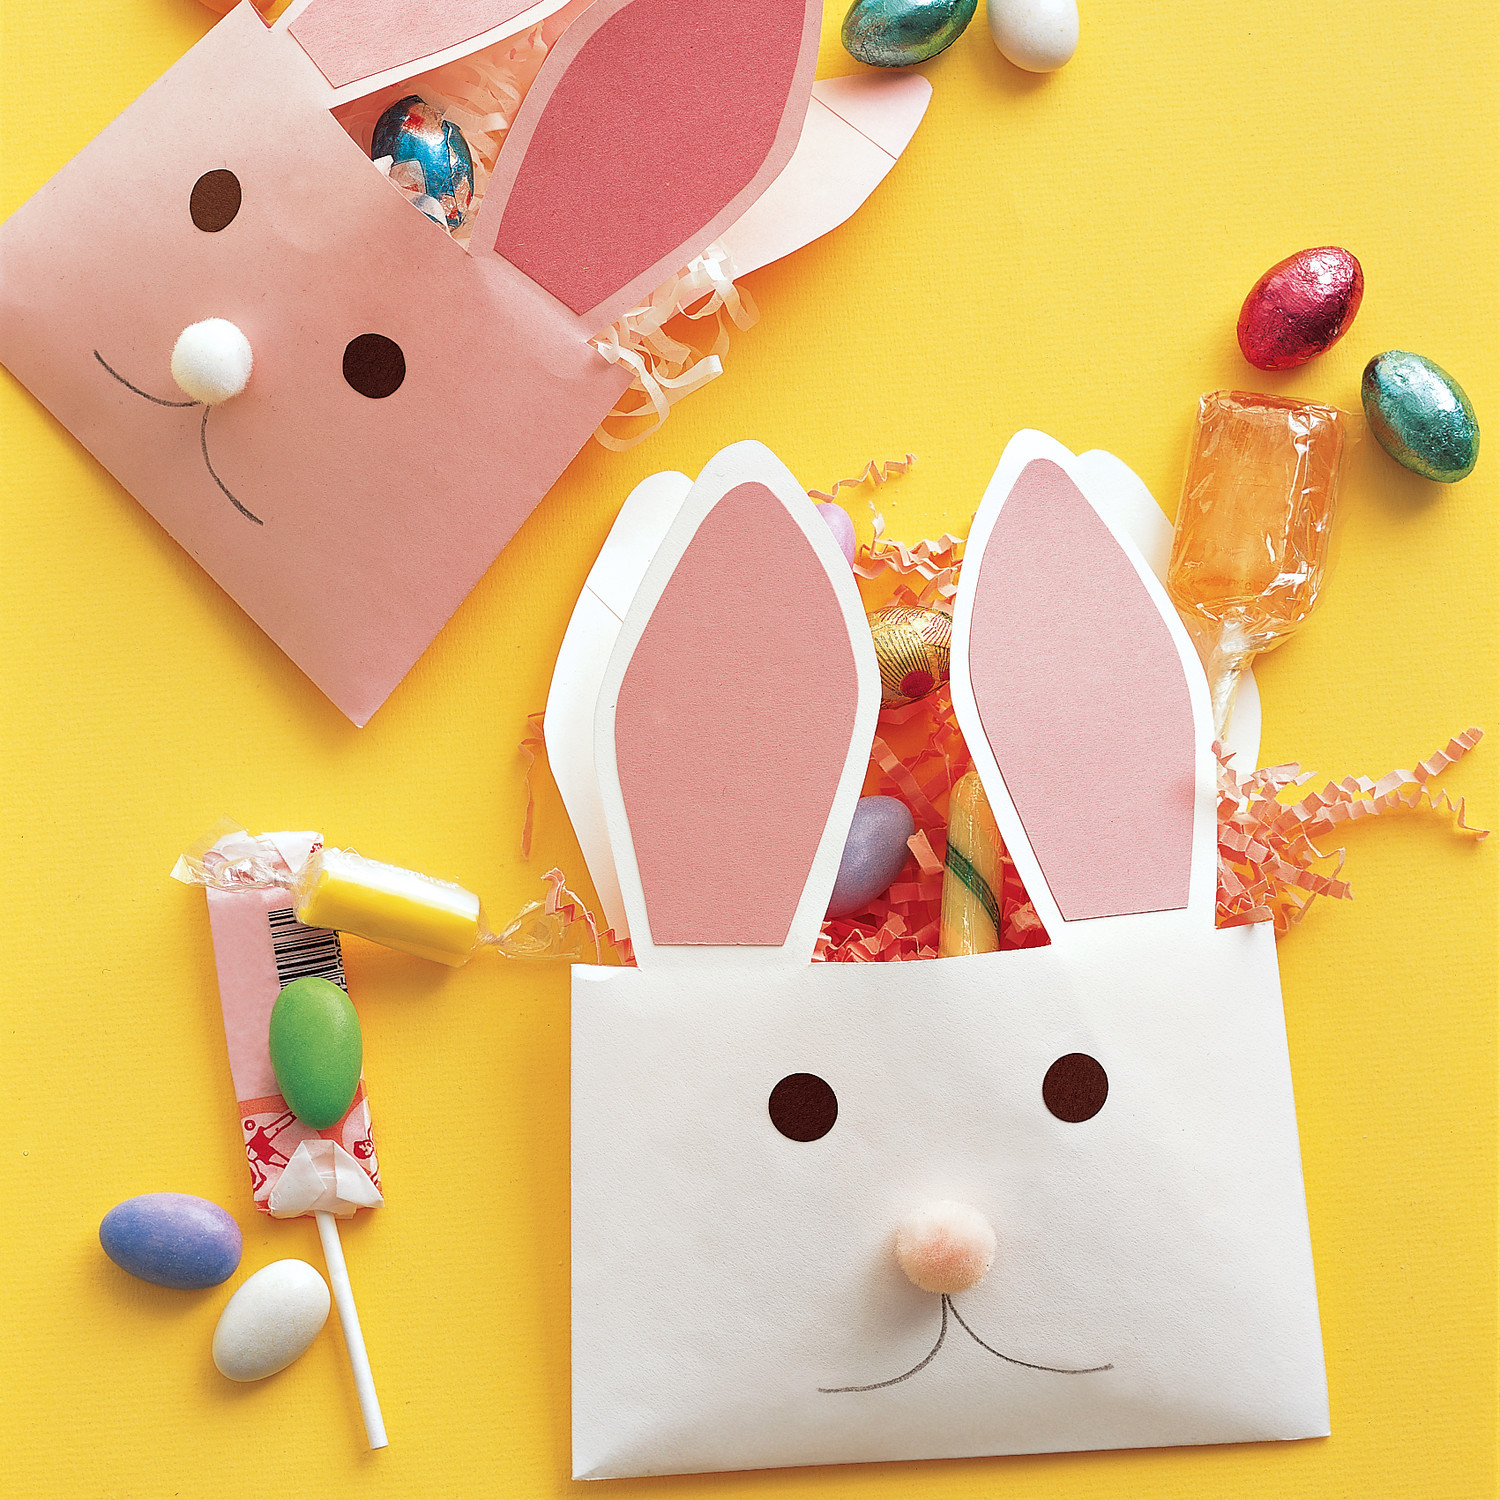 Kids Crafts For Easter
 The Best Easter Crafts and Activities for Kids